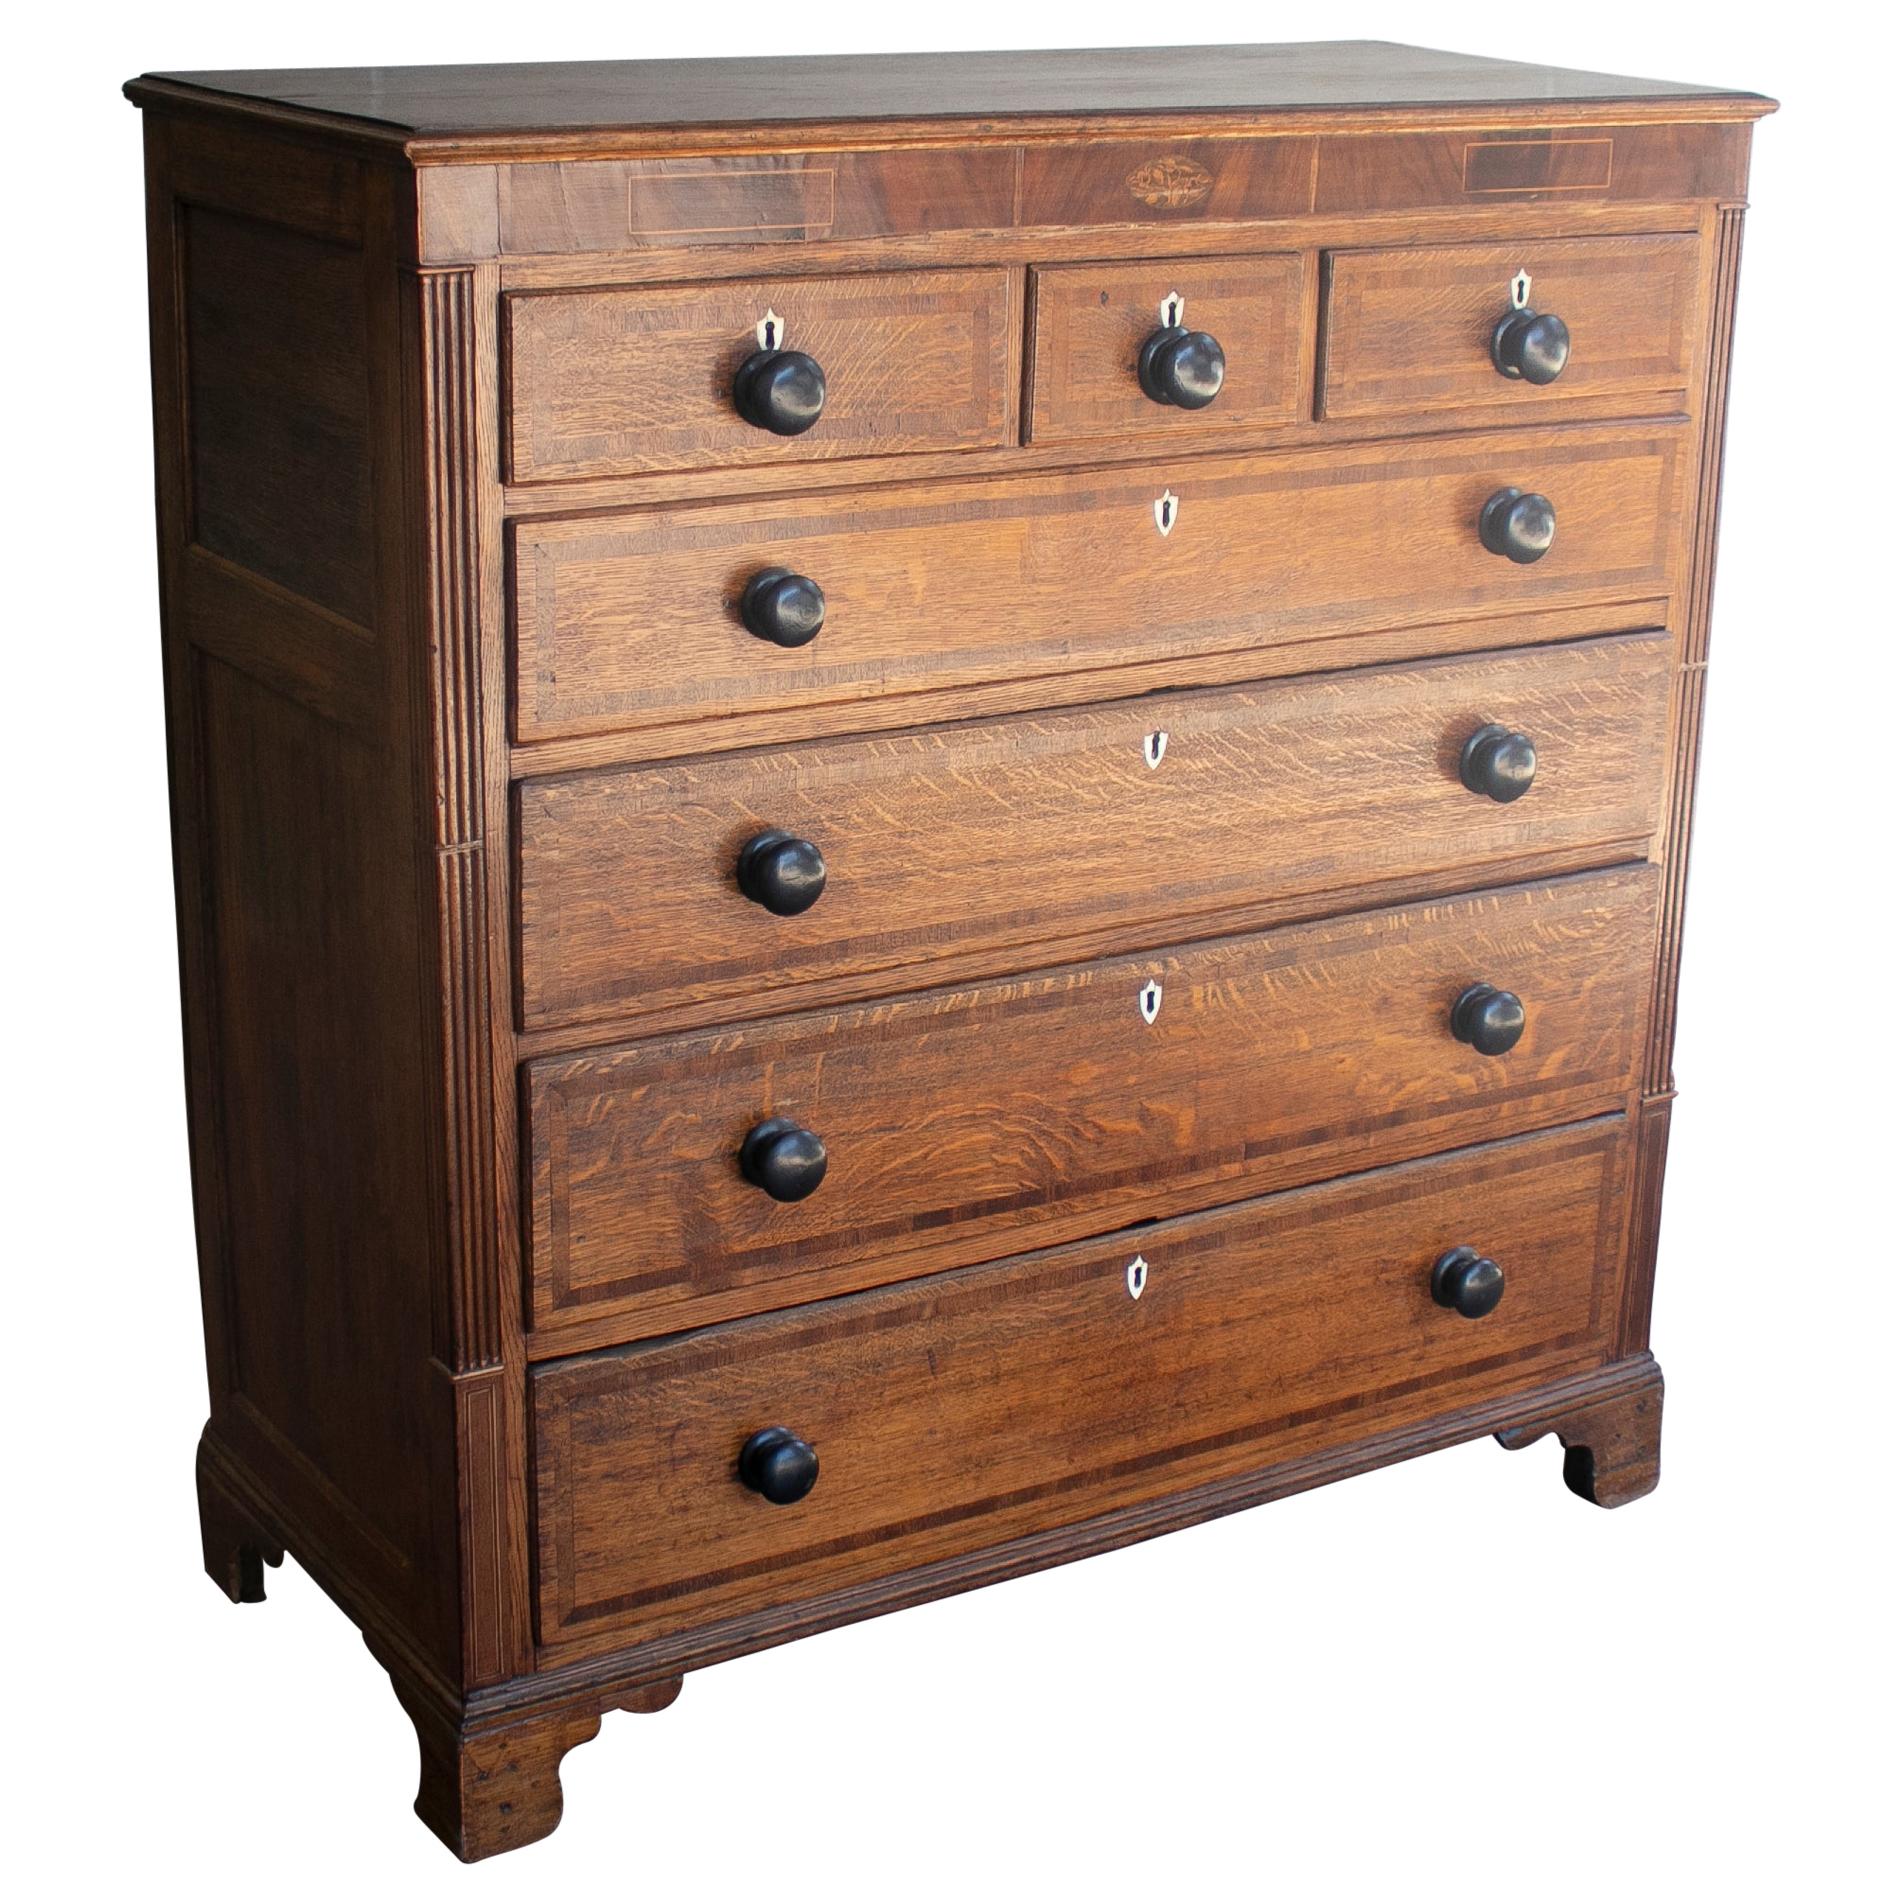 19th Century English Mahogany Chest of Drawers with Inlay Decorations